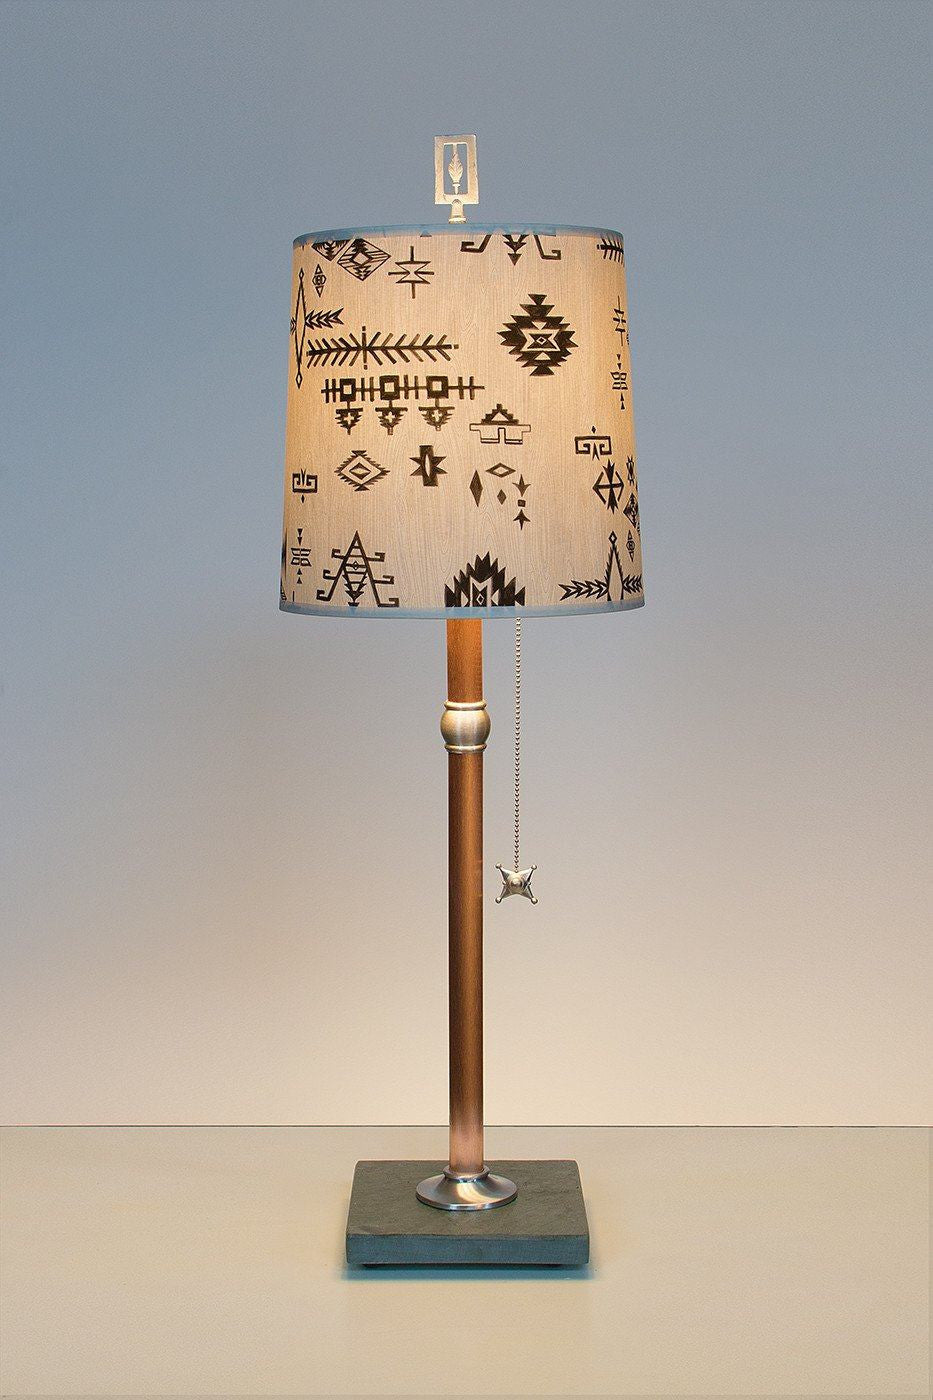 Janna Ugone & Co Table Lamps Copper Table Lamp with Medium Drum Shade in Blanket Sketch